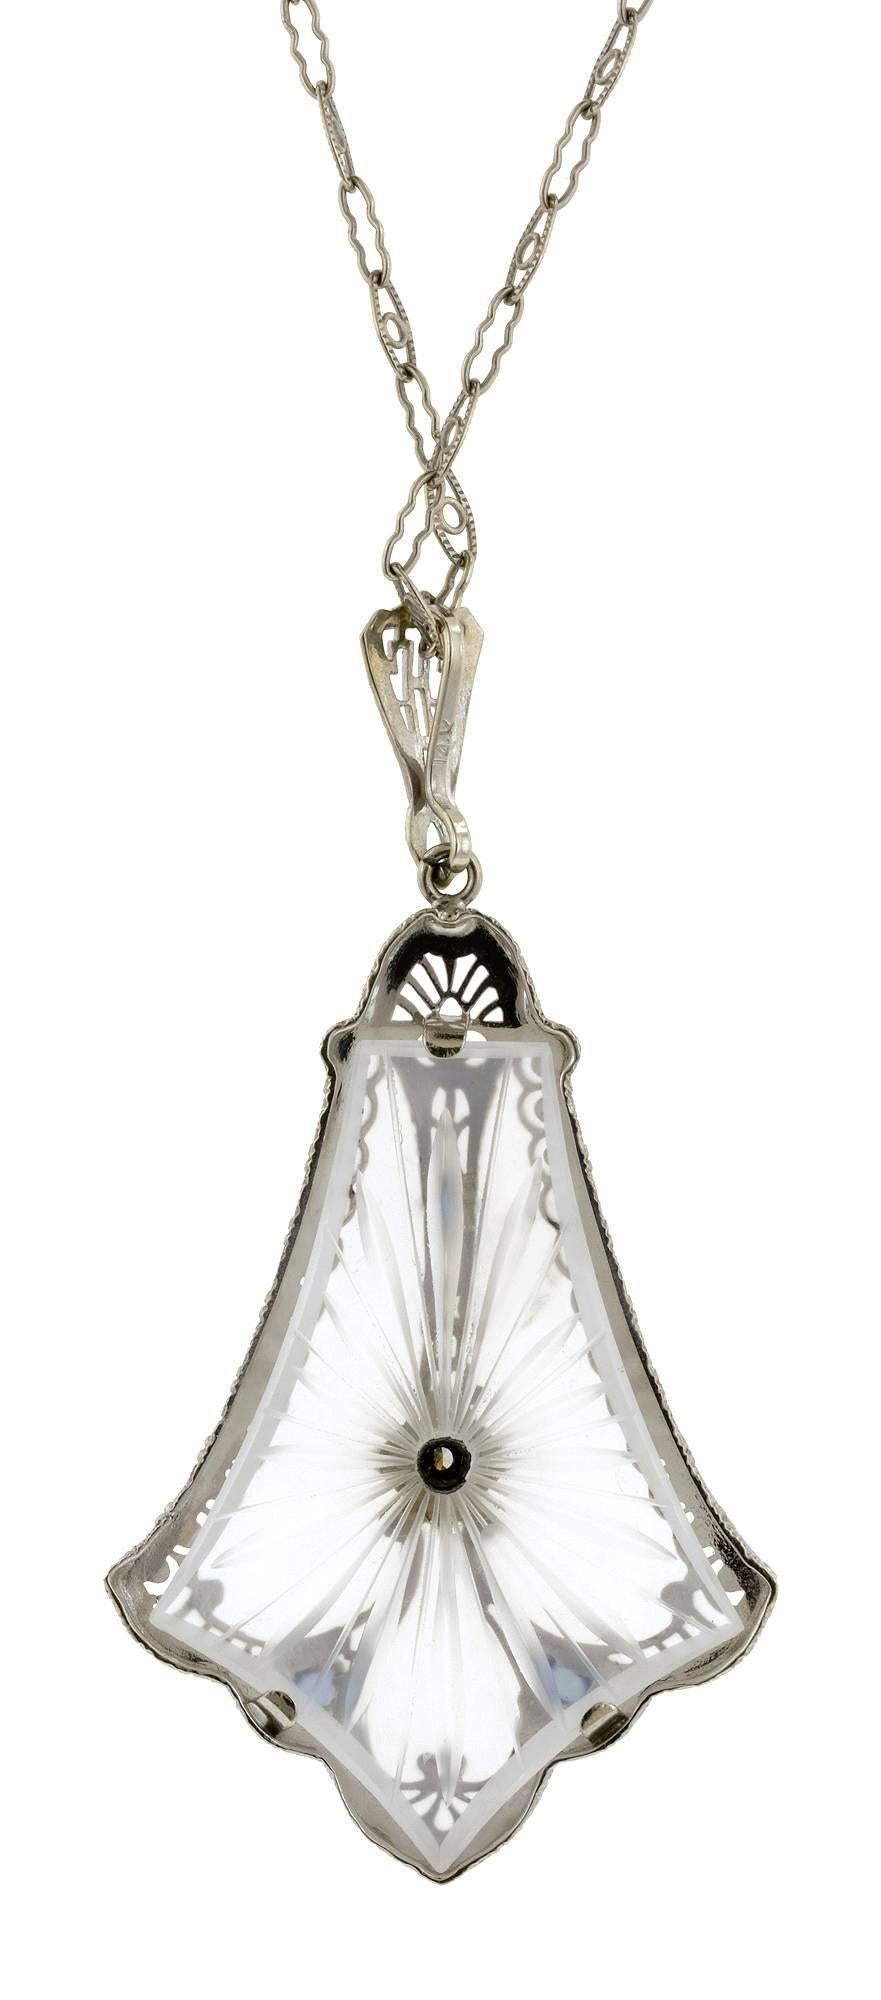 Art Deco rock crystal diamond pendant centering a Round Brilliant cut diamond weighing app. 0.03ct, set with three emerald* accents, in a filigree mounting, fashioned in 14k white gold.  Suspended from a filigree chain measuring app. 16